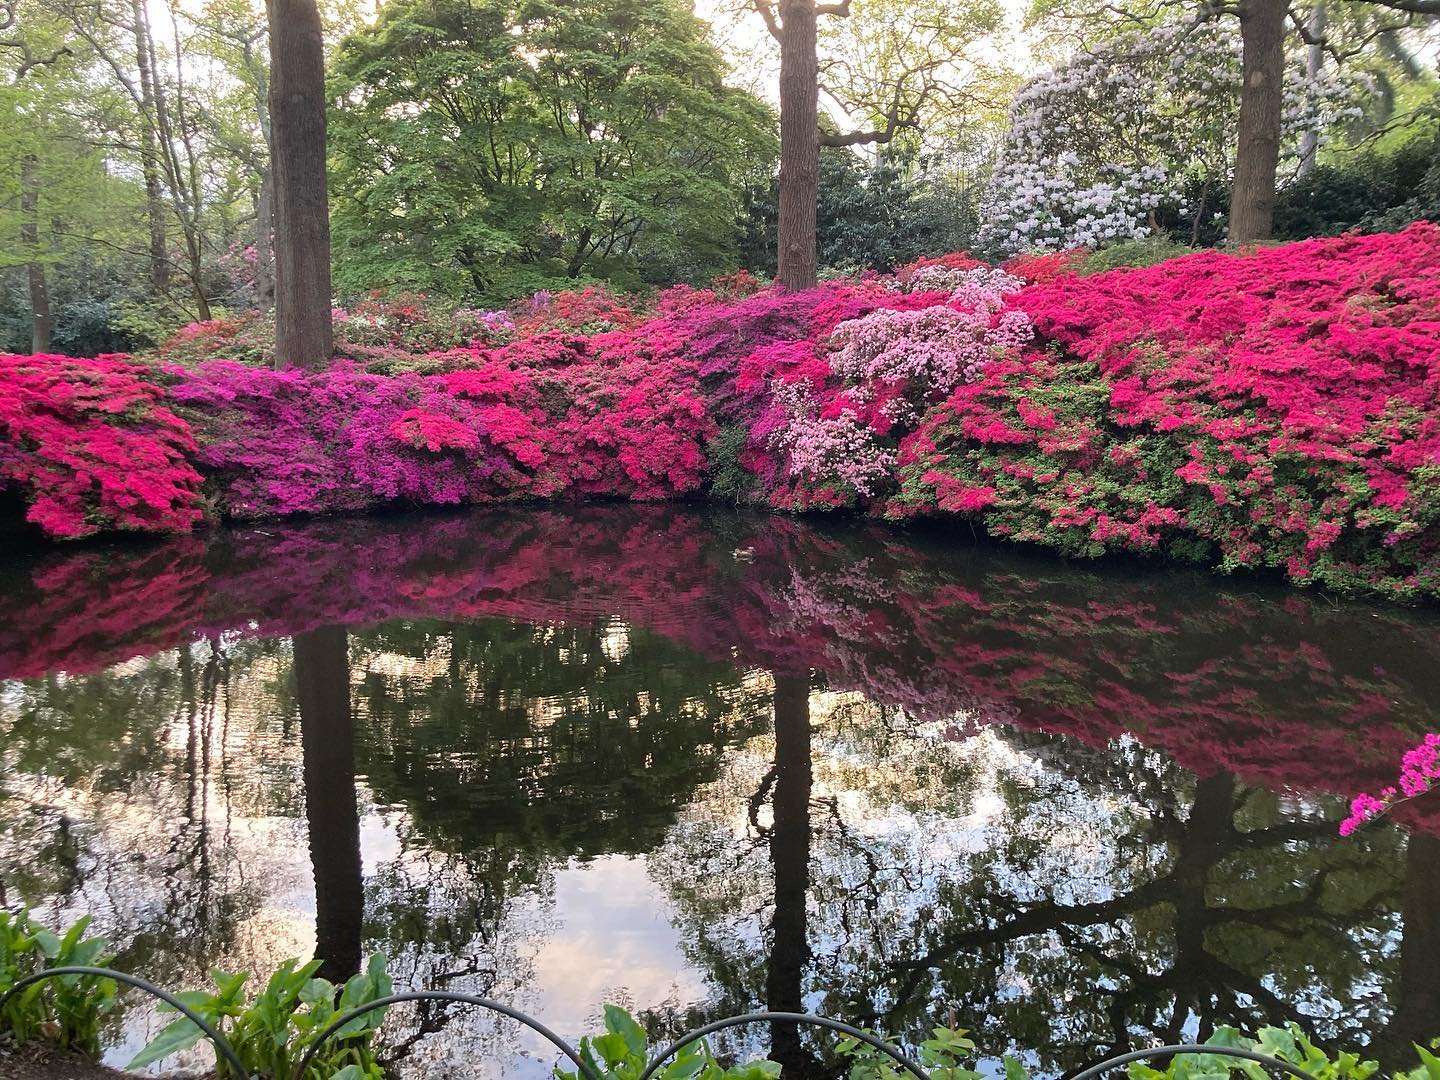 It&rsquo;s that time of year again! Get thee to The Isabella Plantation in Richmond Park to see it in bloom 🌸

Early mornings are a great time to visit if you can. Photo taken at 6.24am today on a walk with my Friday morning ladies. So peaceful and 